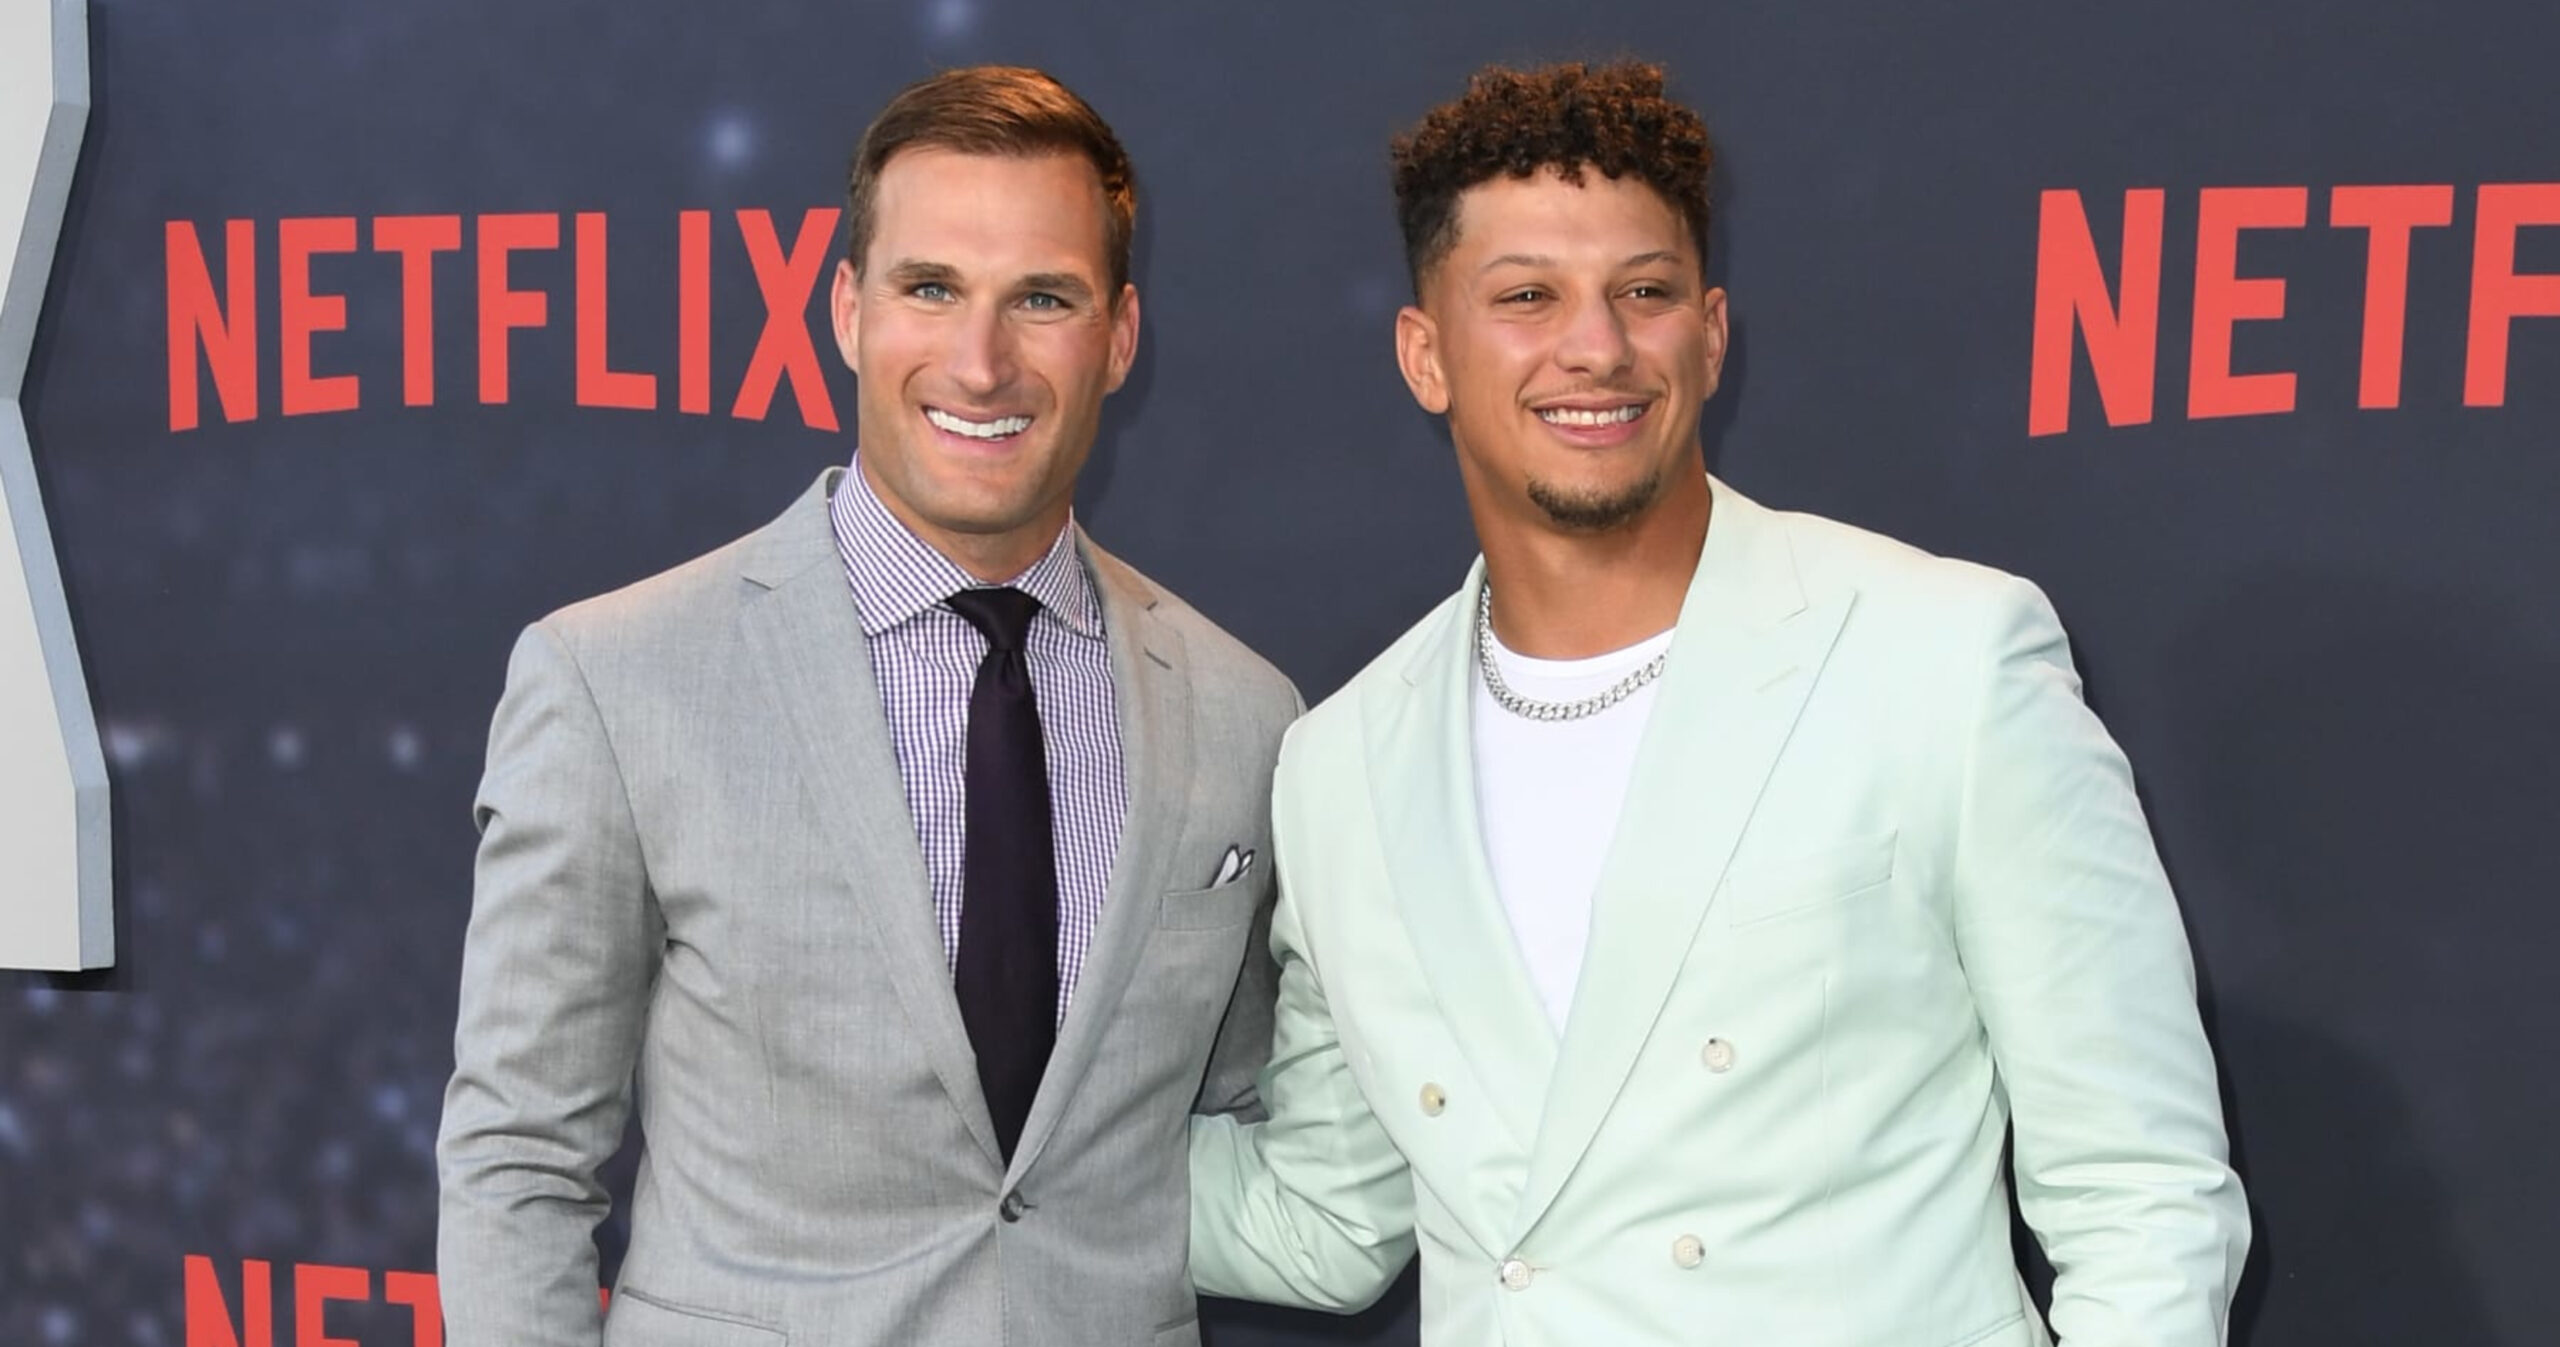 Patrick Mahomes congratulated Viking King, Kirk Cousin after He confirmed Wife Julie pregnant 